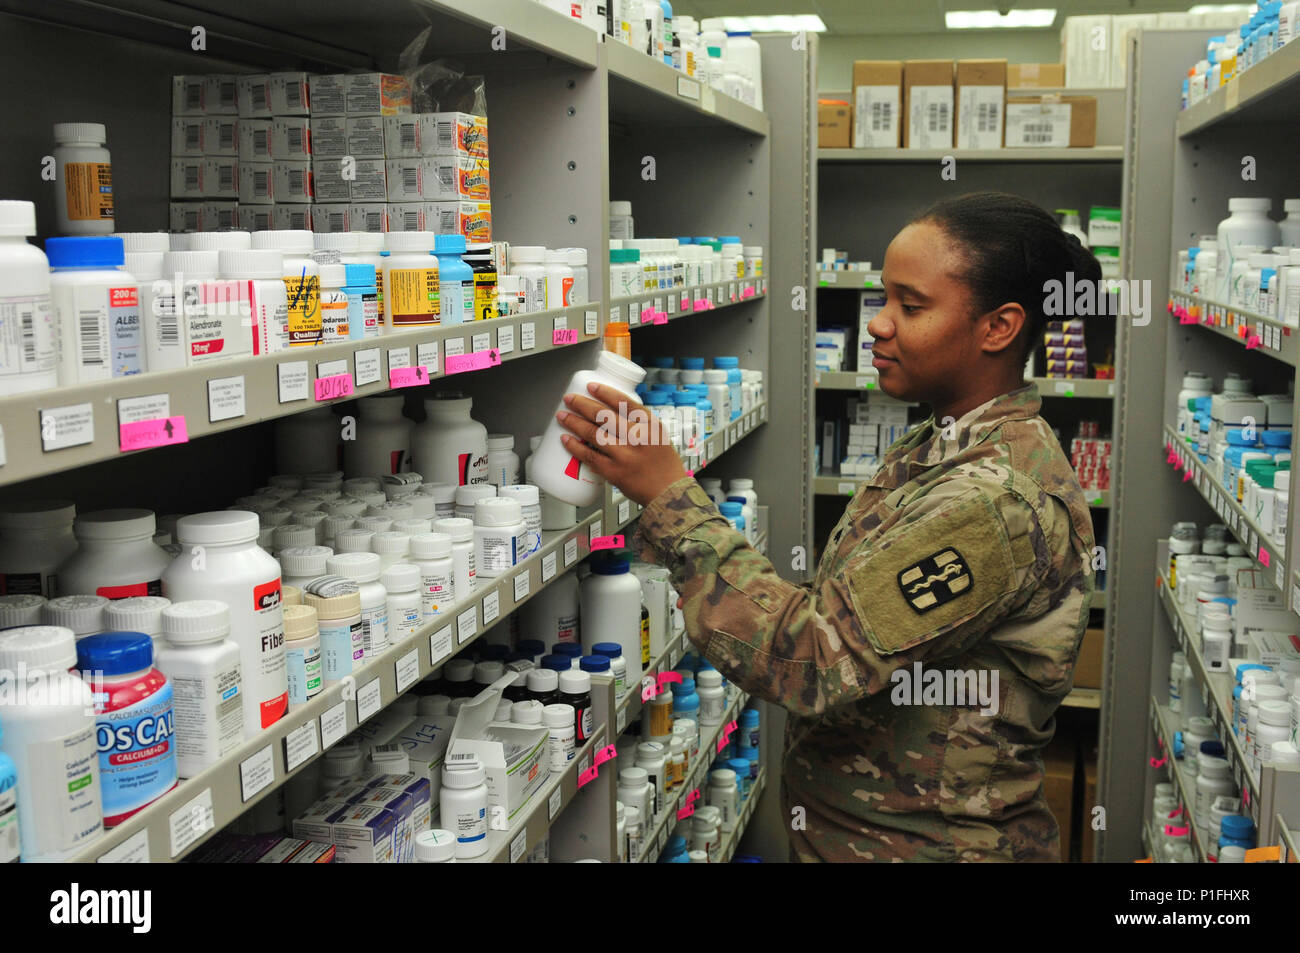 Sgt. Jessica Evans, pharmacy specialist with the 31st Combat Support Hospital and Clewiston, Fla. native, restocks pharmacuticals Oct. 25, 2016 at Camp Arifjan, Kuwait. Evans along with a small team of Soldiers operate the 31st CSH pharmacy providing pharmaceutical support to patients suffering from injuries and illnesses throughout the ARCENT area of operations. The team processes more than 3,500 outpatient prescriptions a month to service members and civilians while providing support to inpatient care and other facilities throughout the region. (U.S. Army photo by Sgt. Aaron Ellerman) Stock Photo